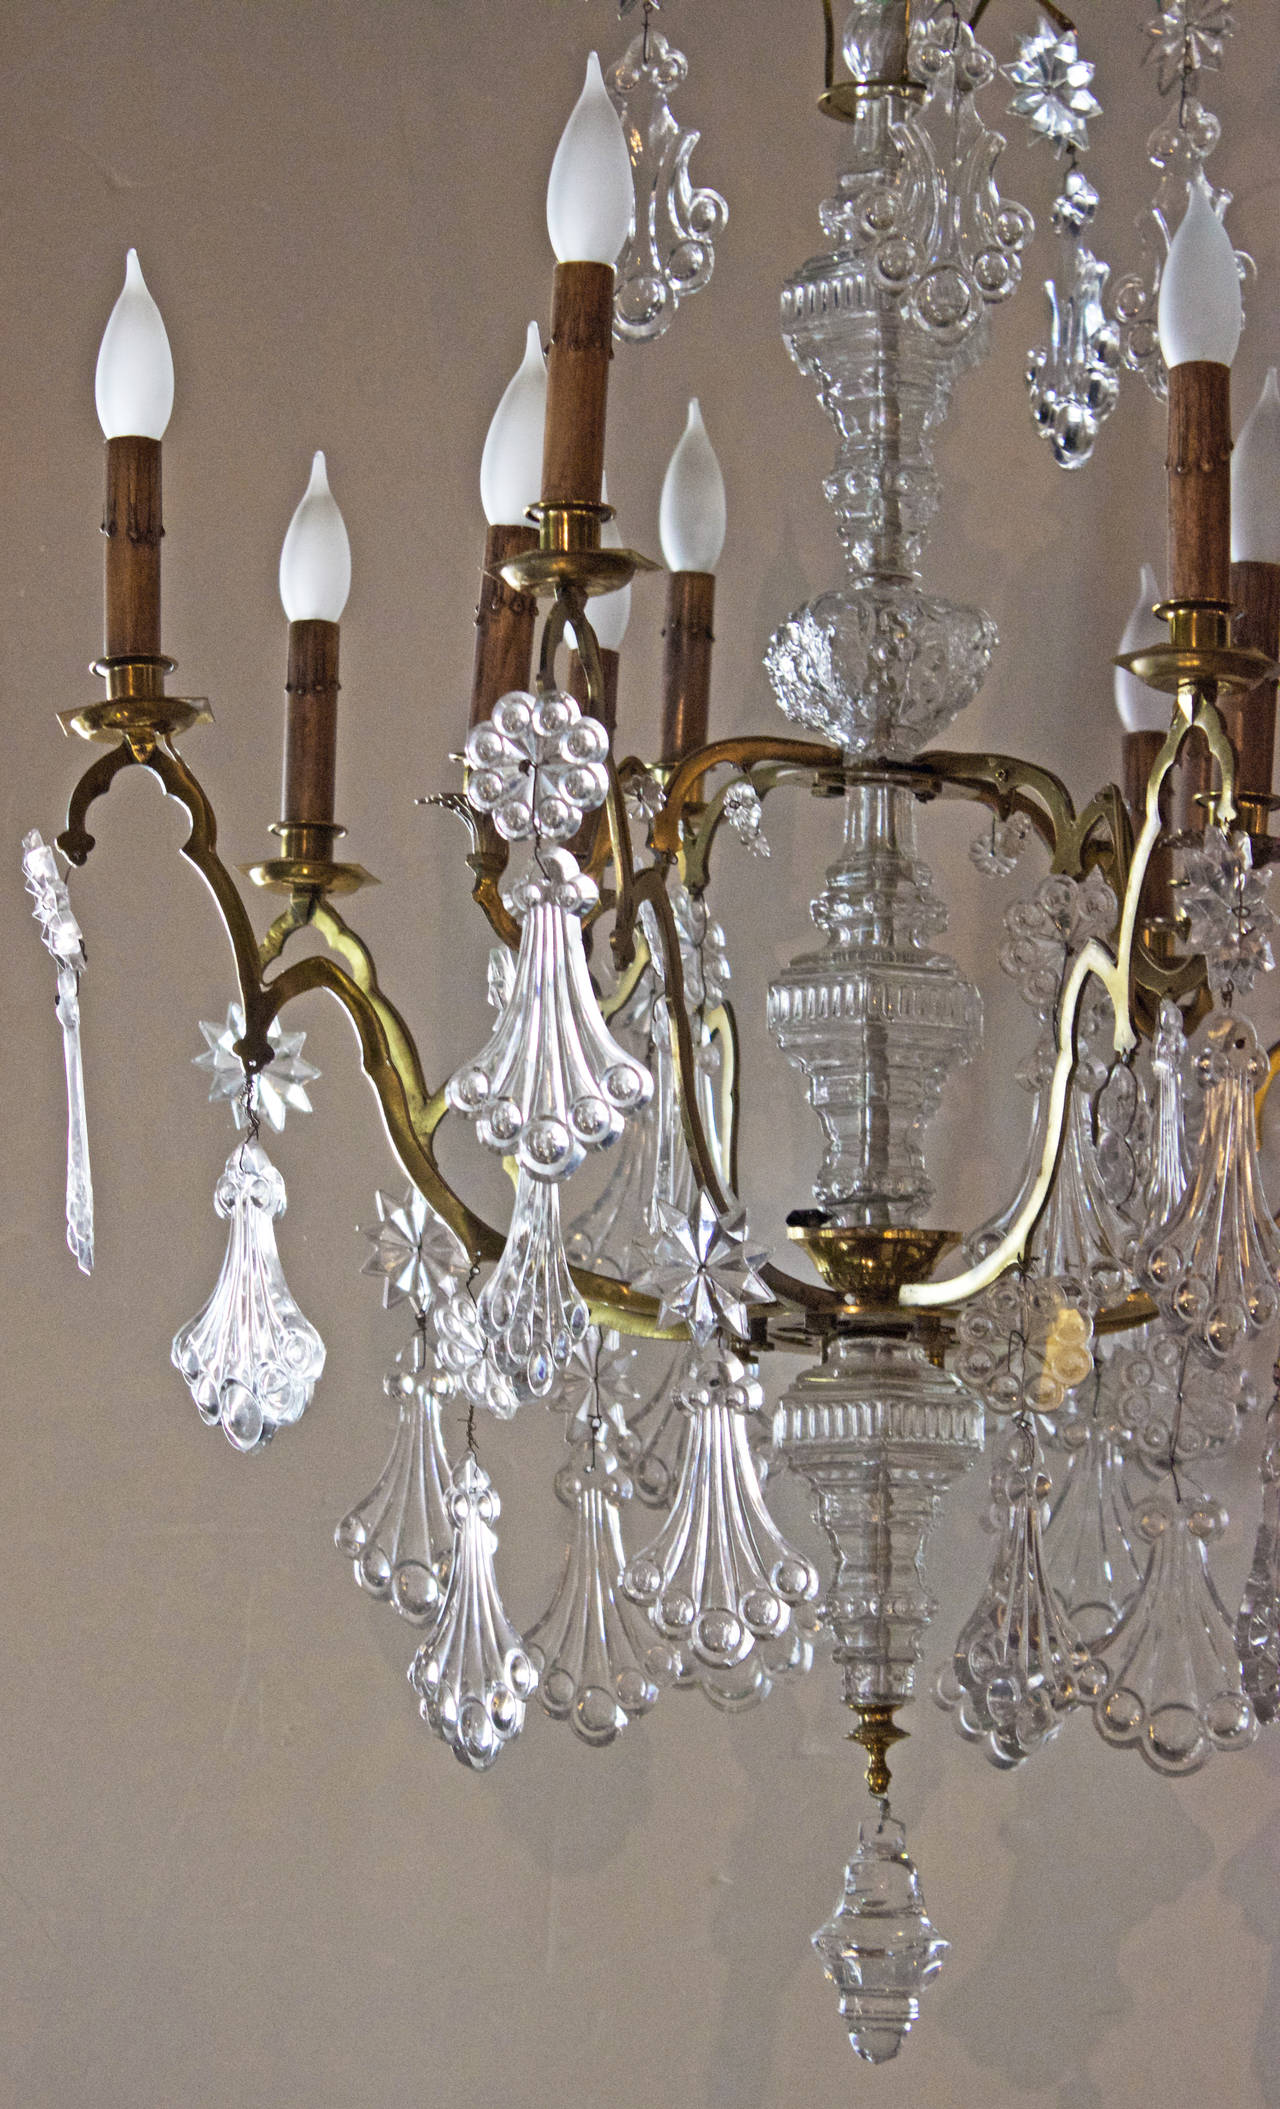 This Louis XV chandelier deploys around a bronze metal structure made of stems forming a central 